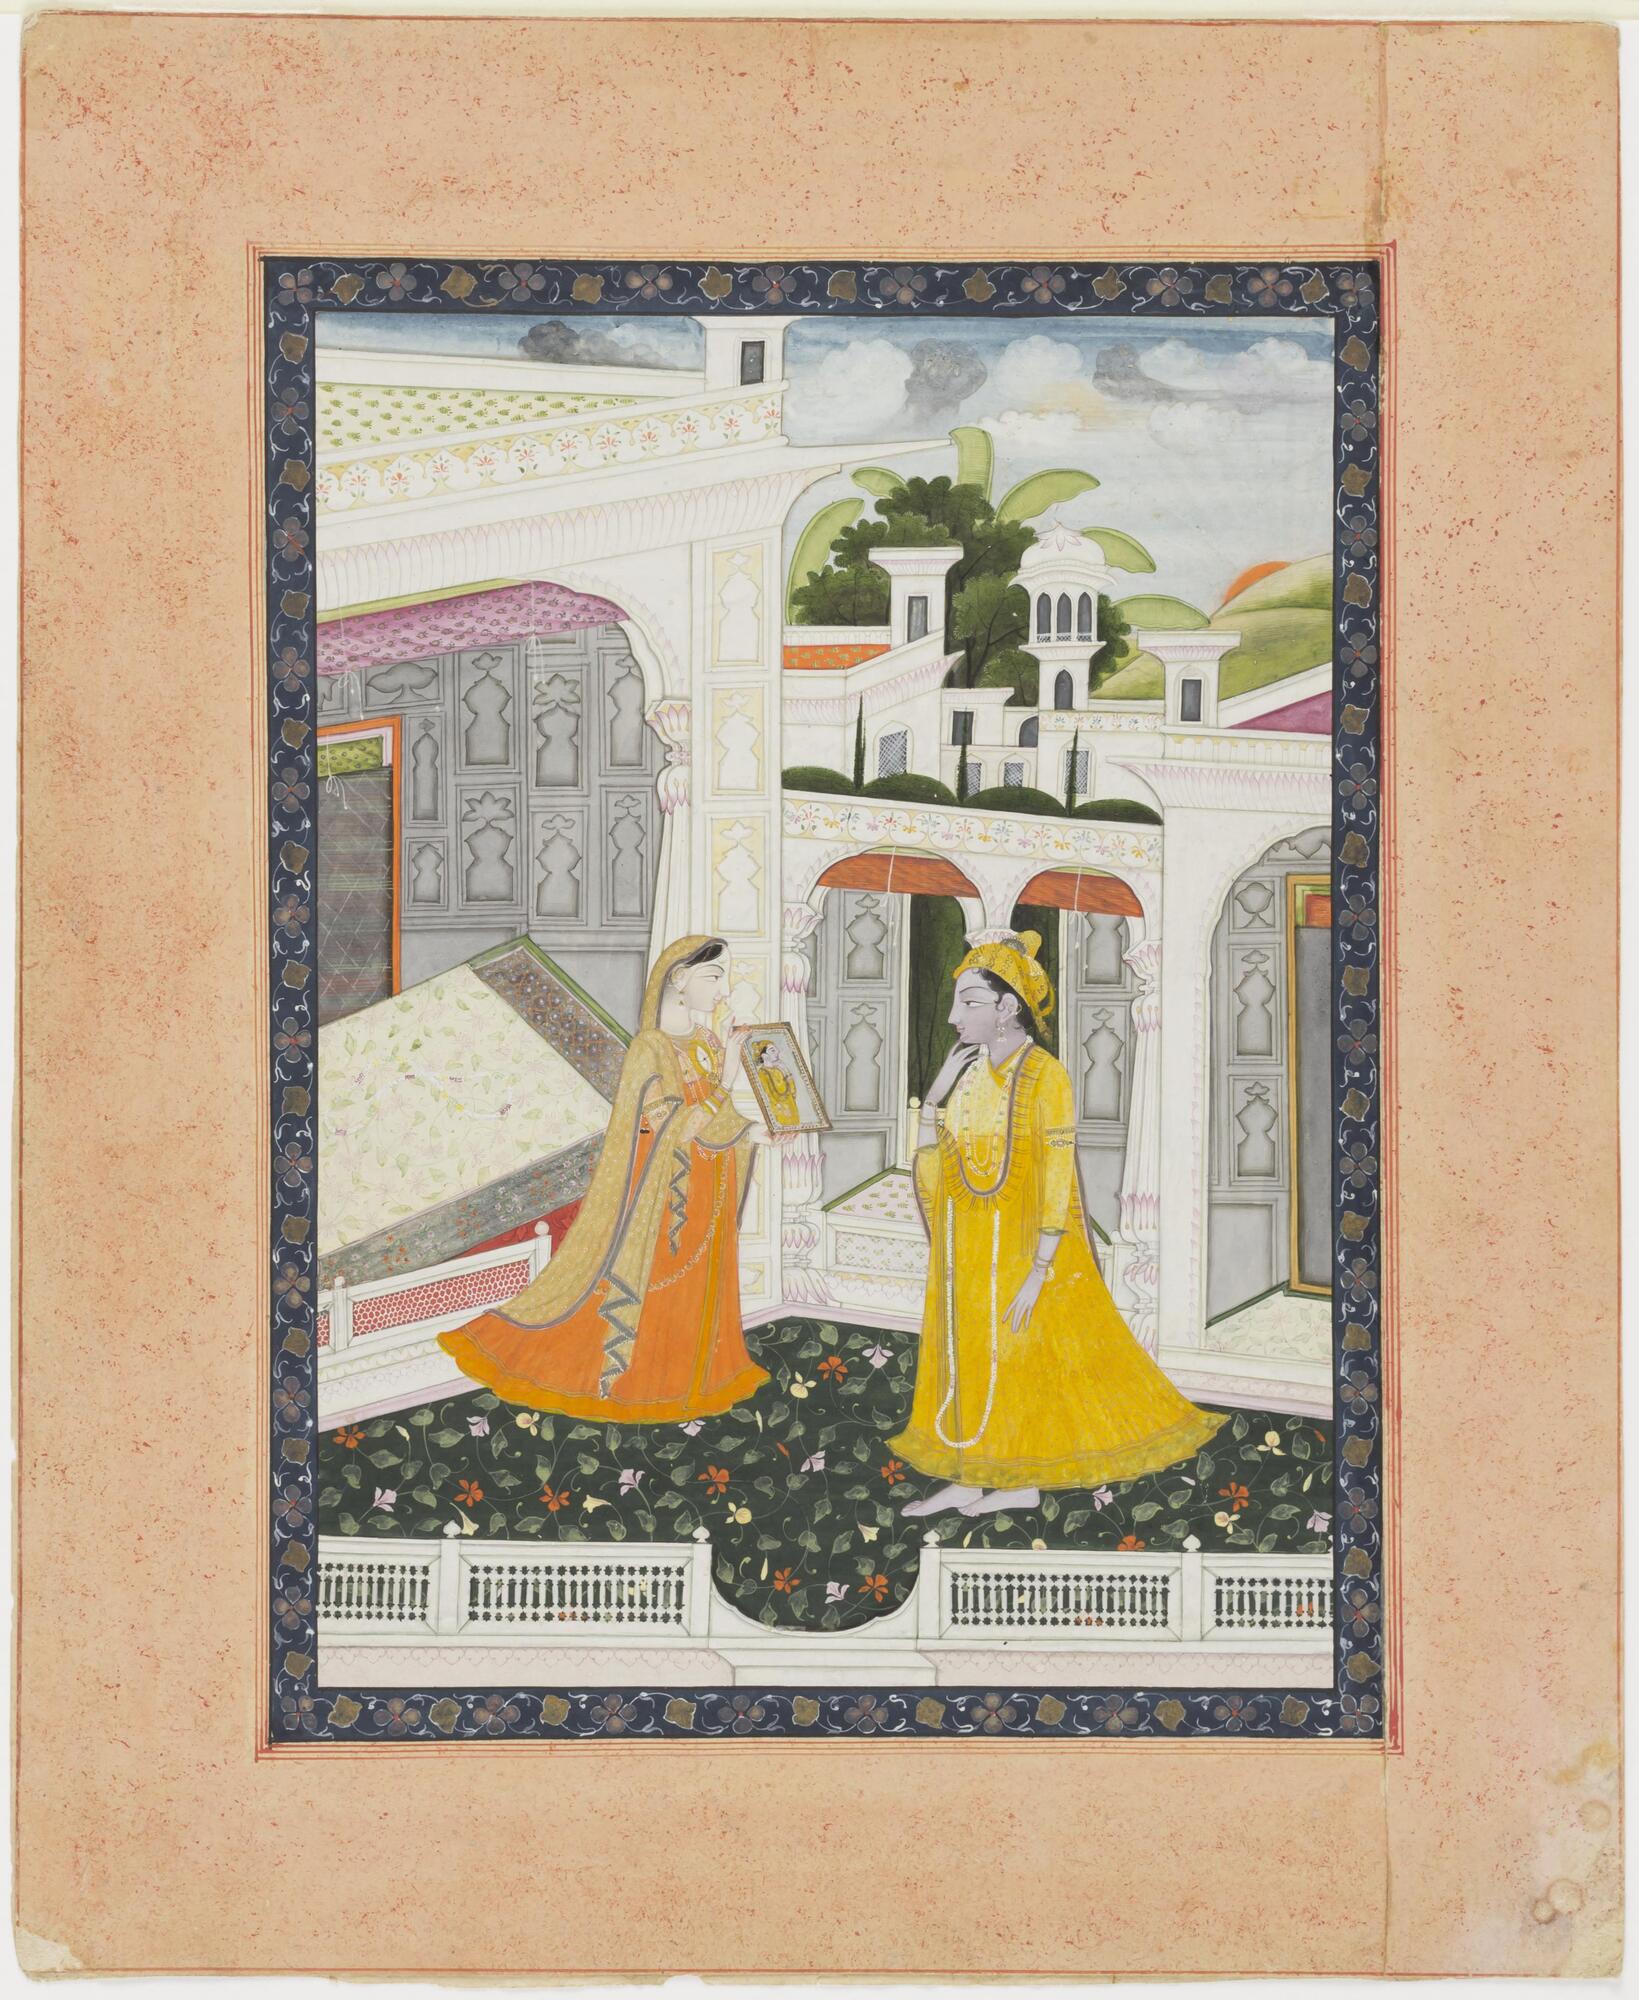 Radha and Krishna stand facing each other in the courtyard of an ornately decorated white building, which is situated amidst other white structures. Radha holds a mirror and Krishna gazes at it. Krishna's reflection can be seen in the mirror. The painting is placed on an orange background and within a vegetal border.